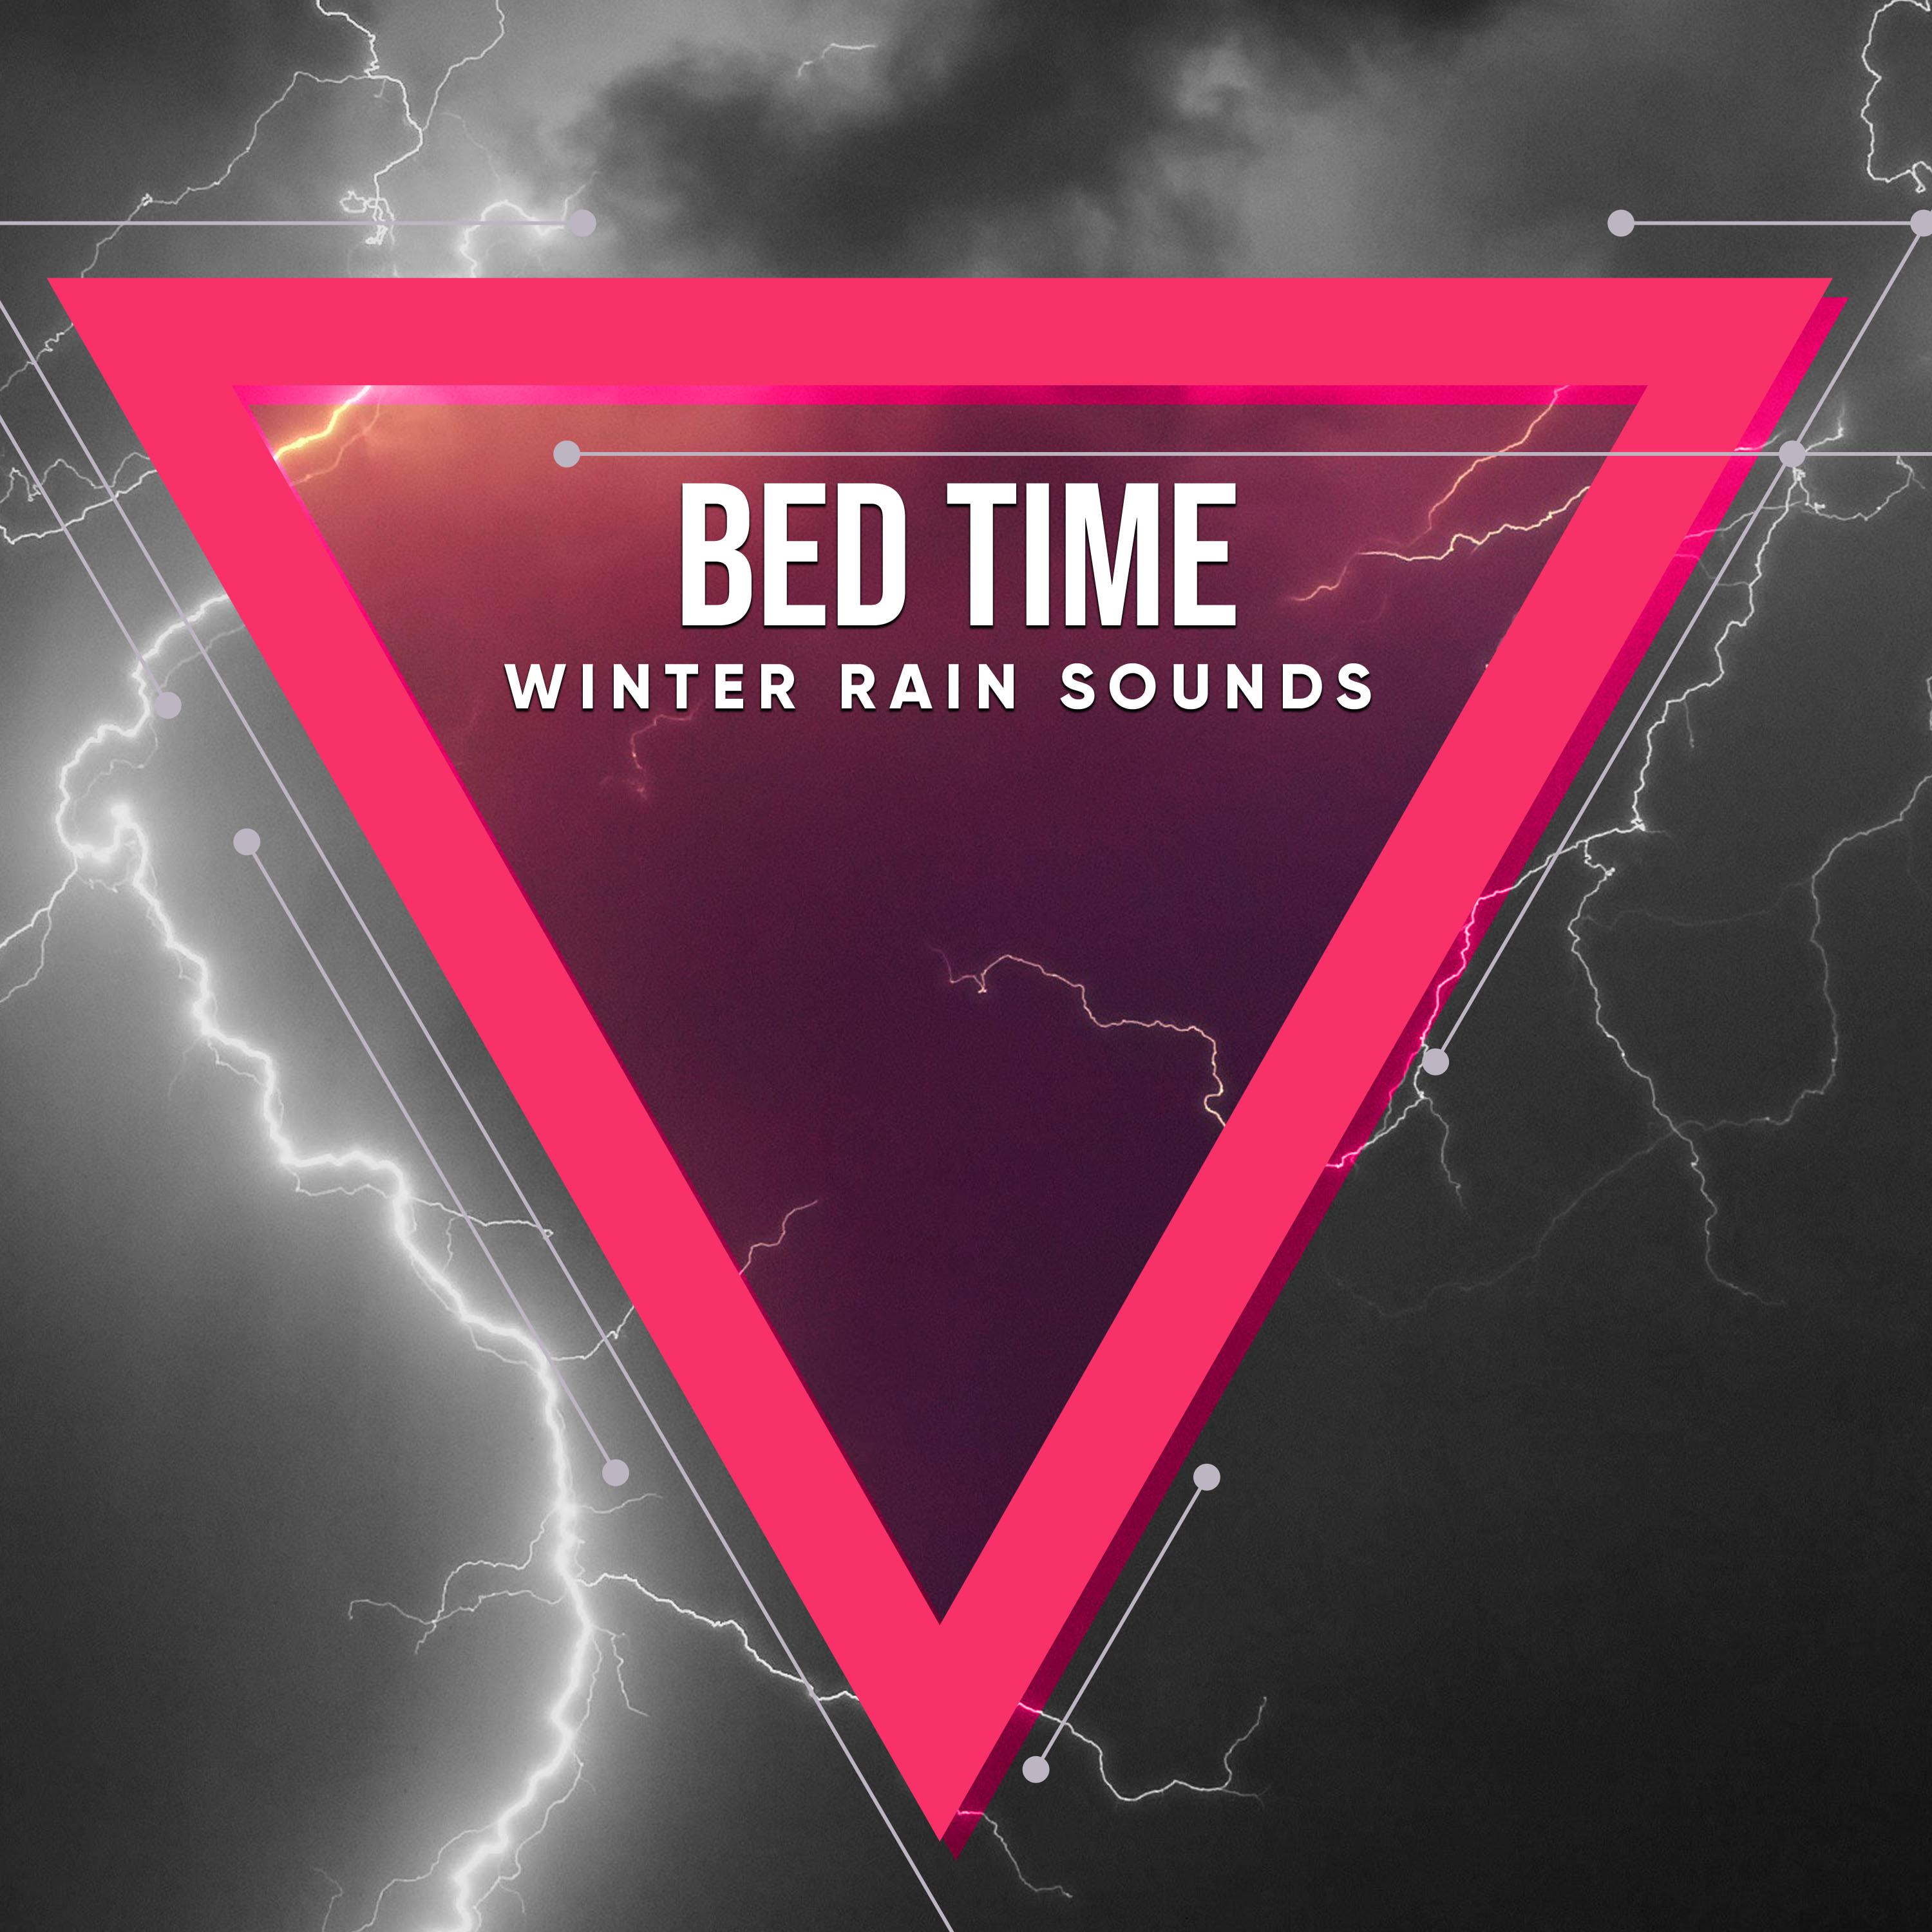 #16 Bed Time Winter Rain Sounds